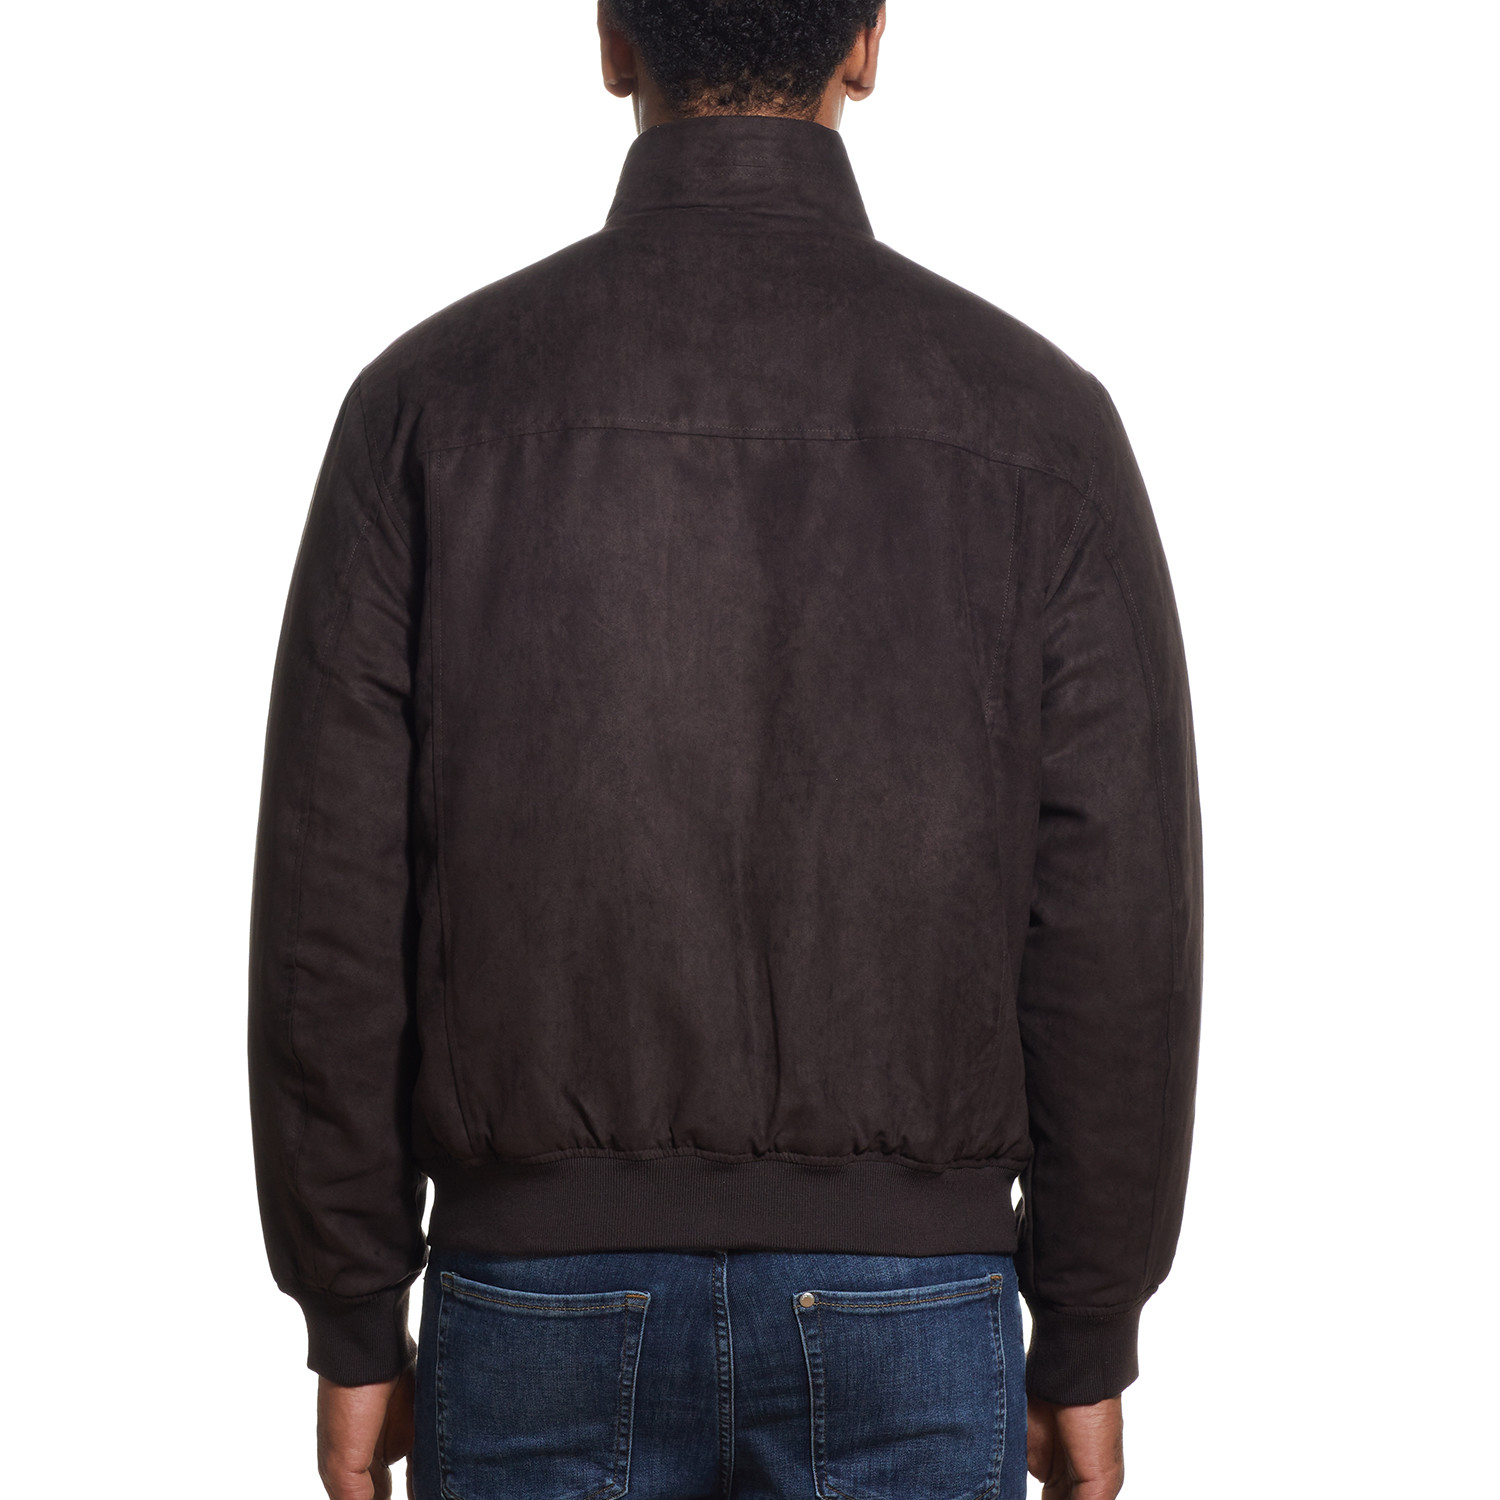 Microsuede Bomber Jacket // Chocolate Brown (XL) - Weatherproof - Touch ...